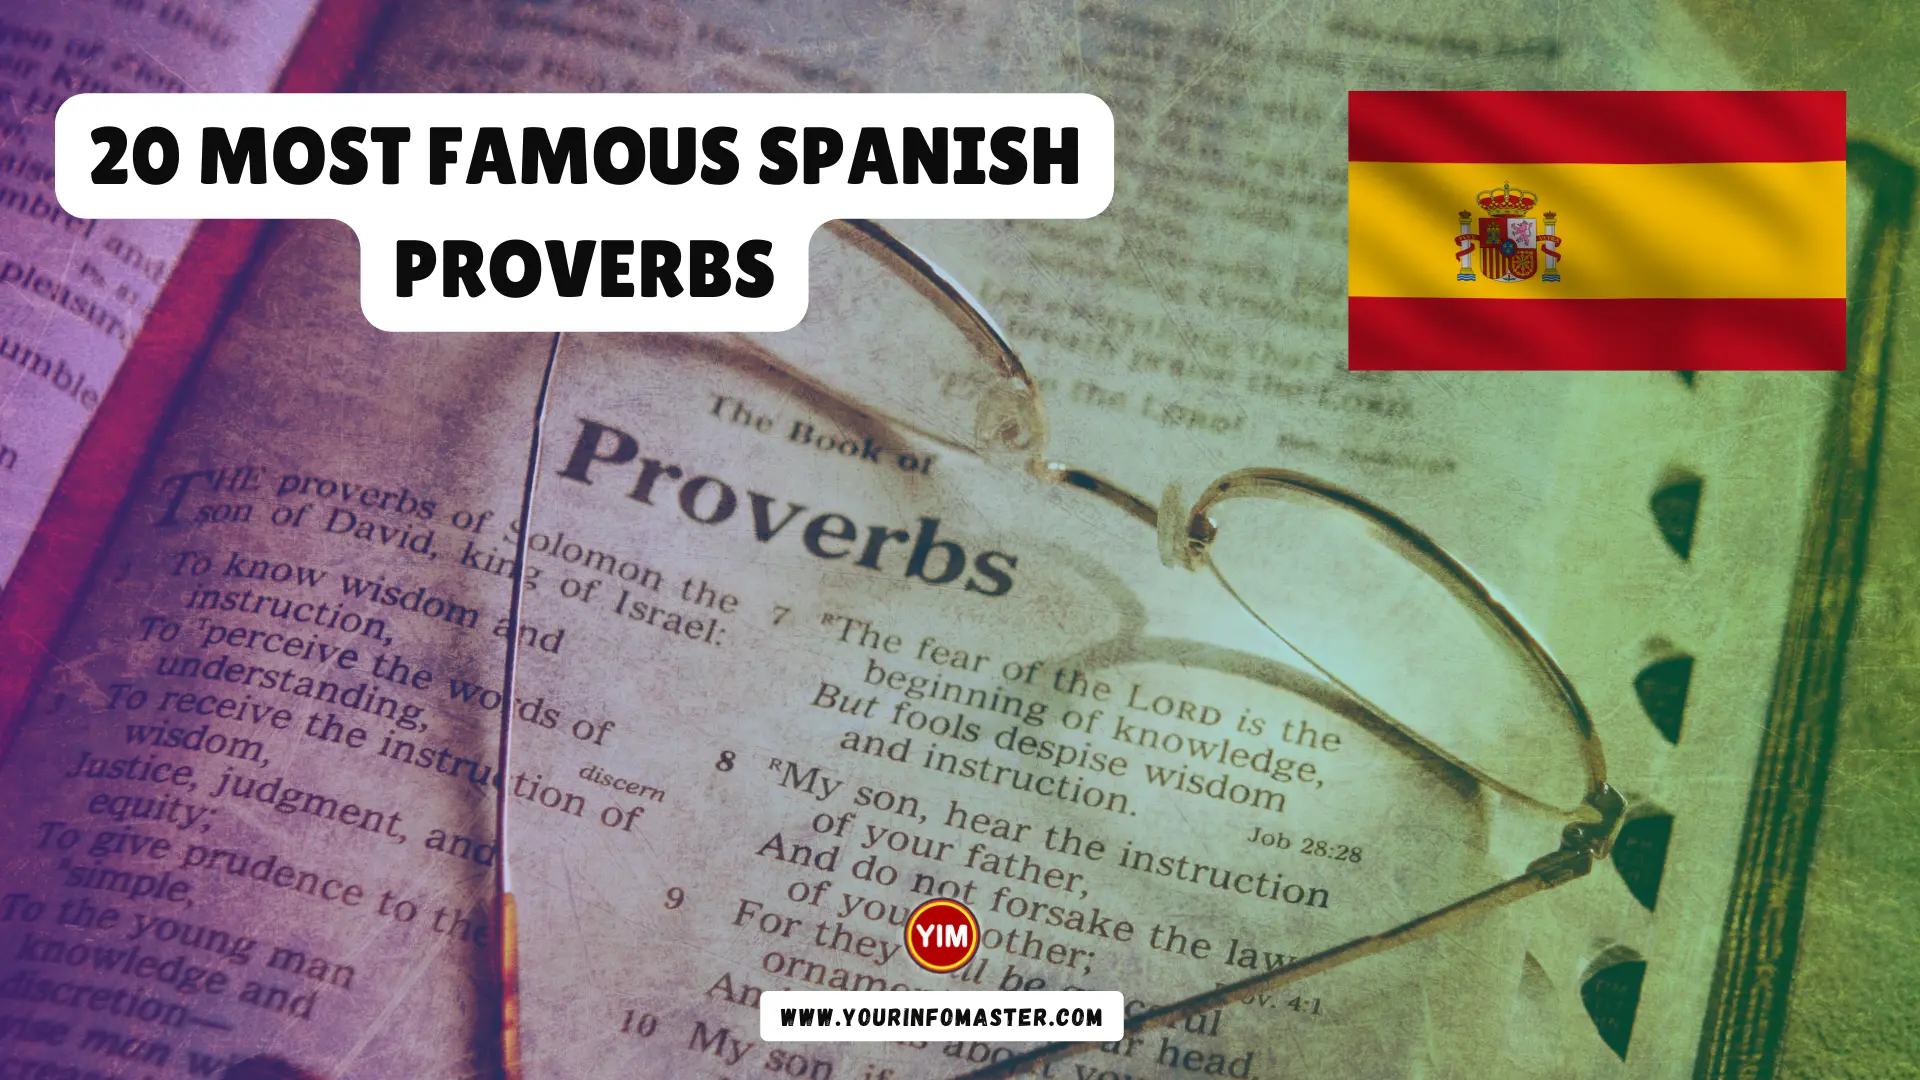 20 Most Famous Spanish Proverbs